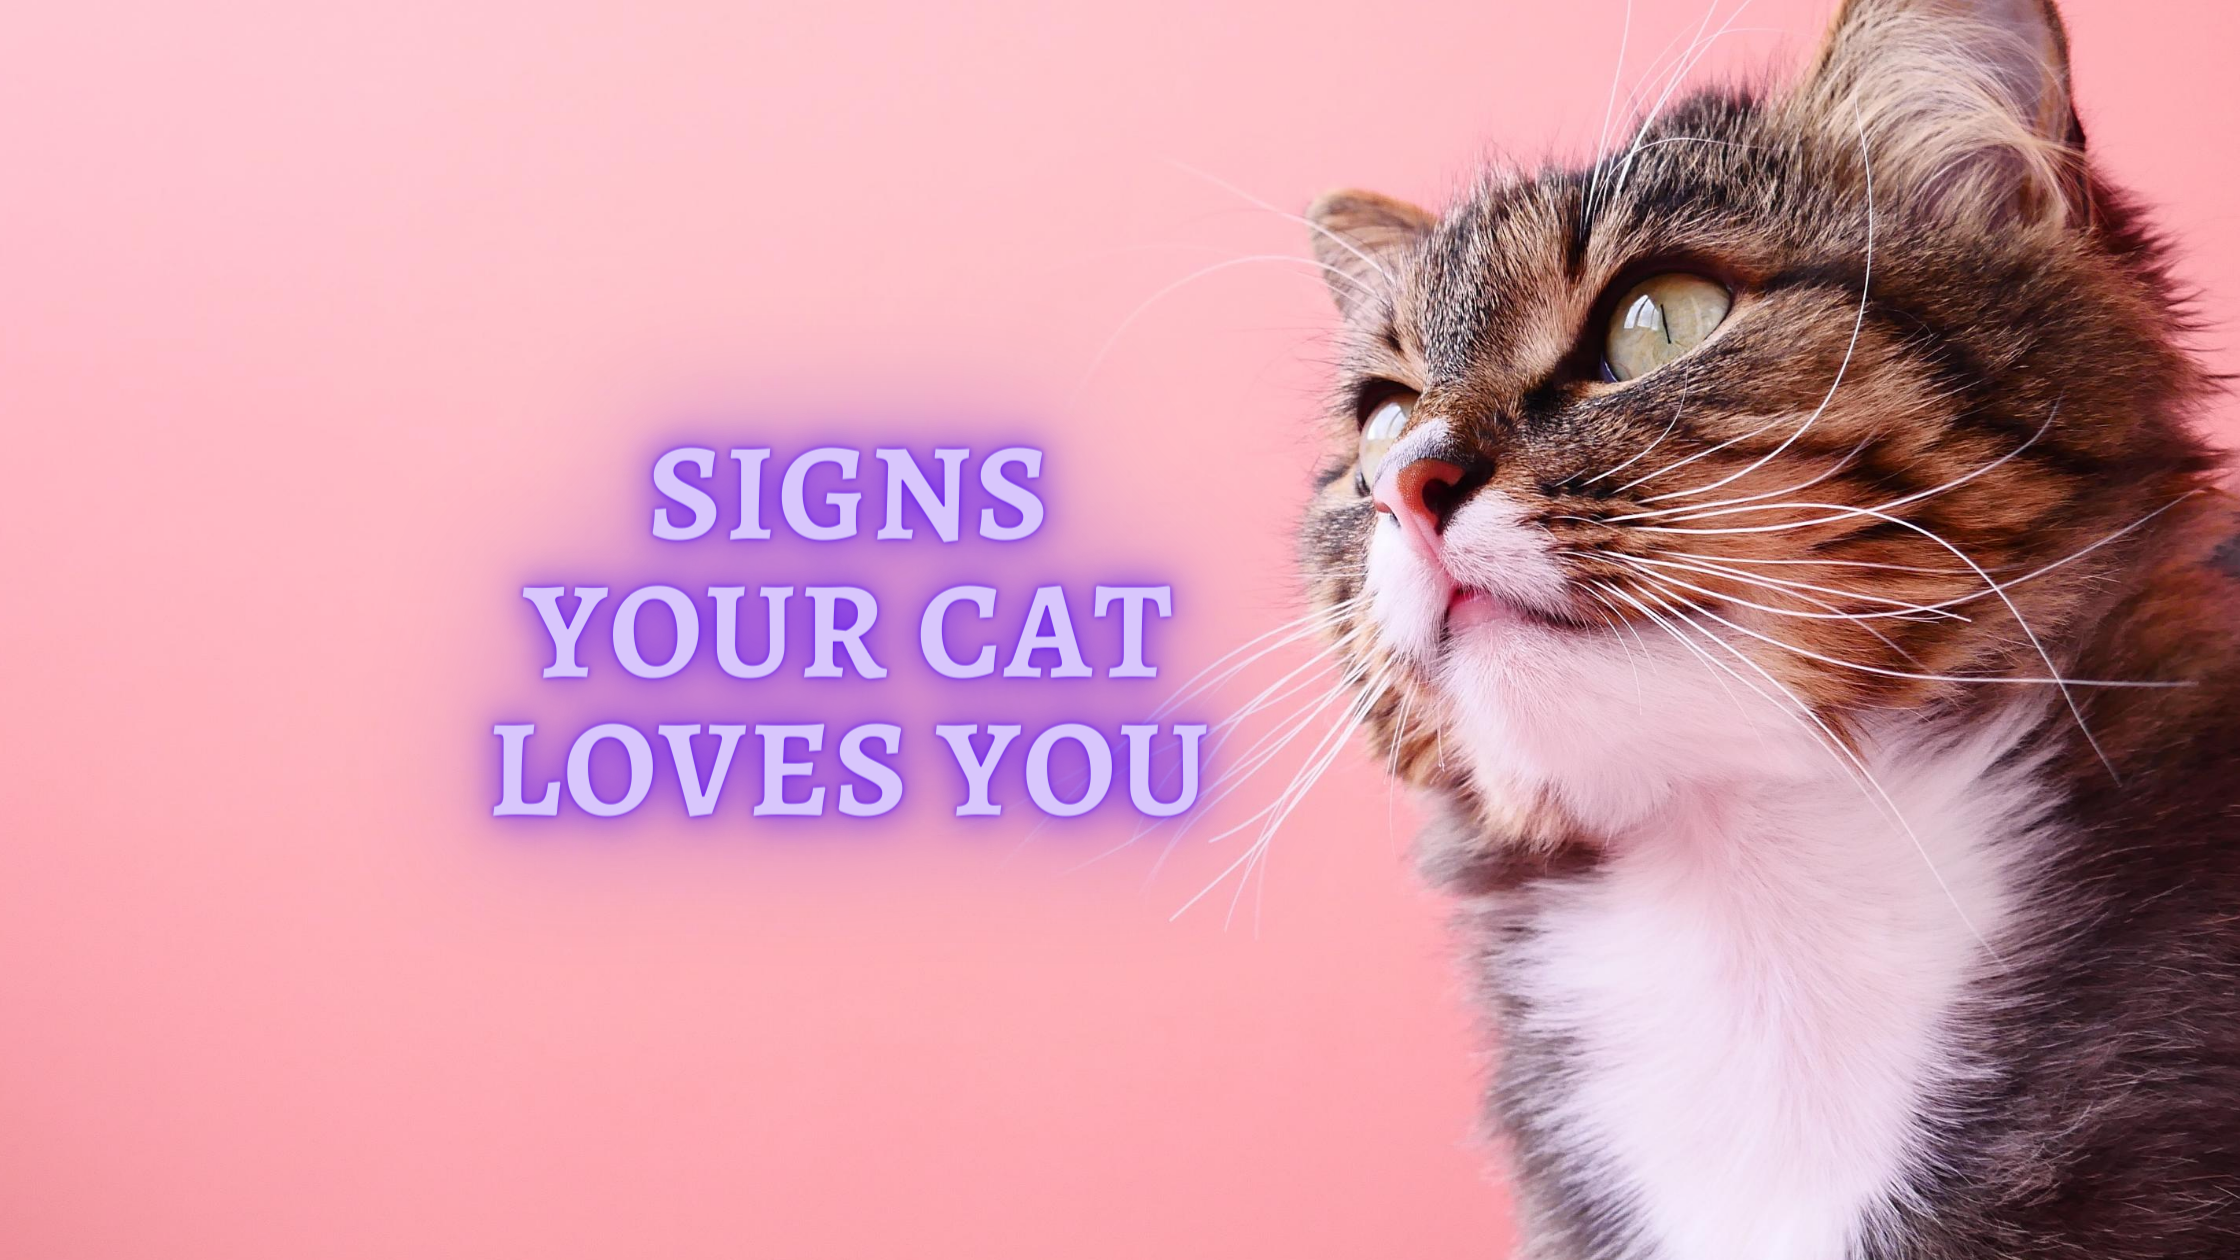 8 signs your cat loves you